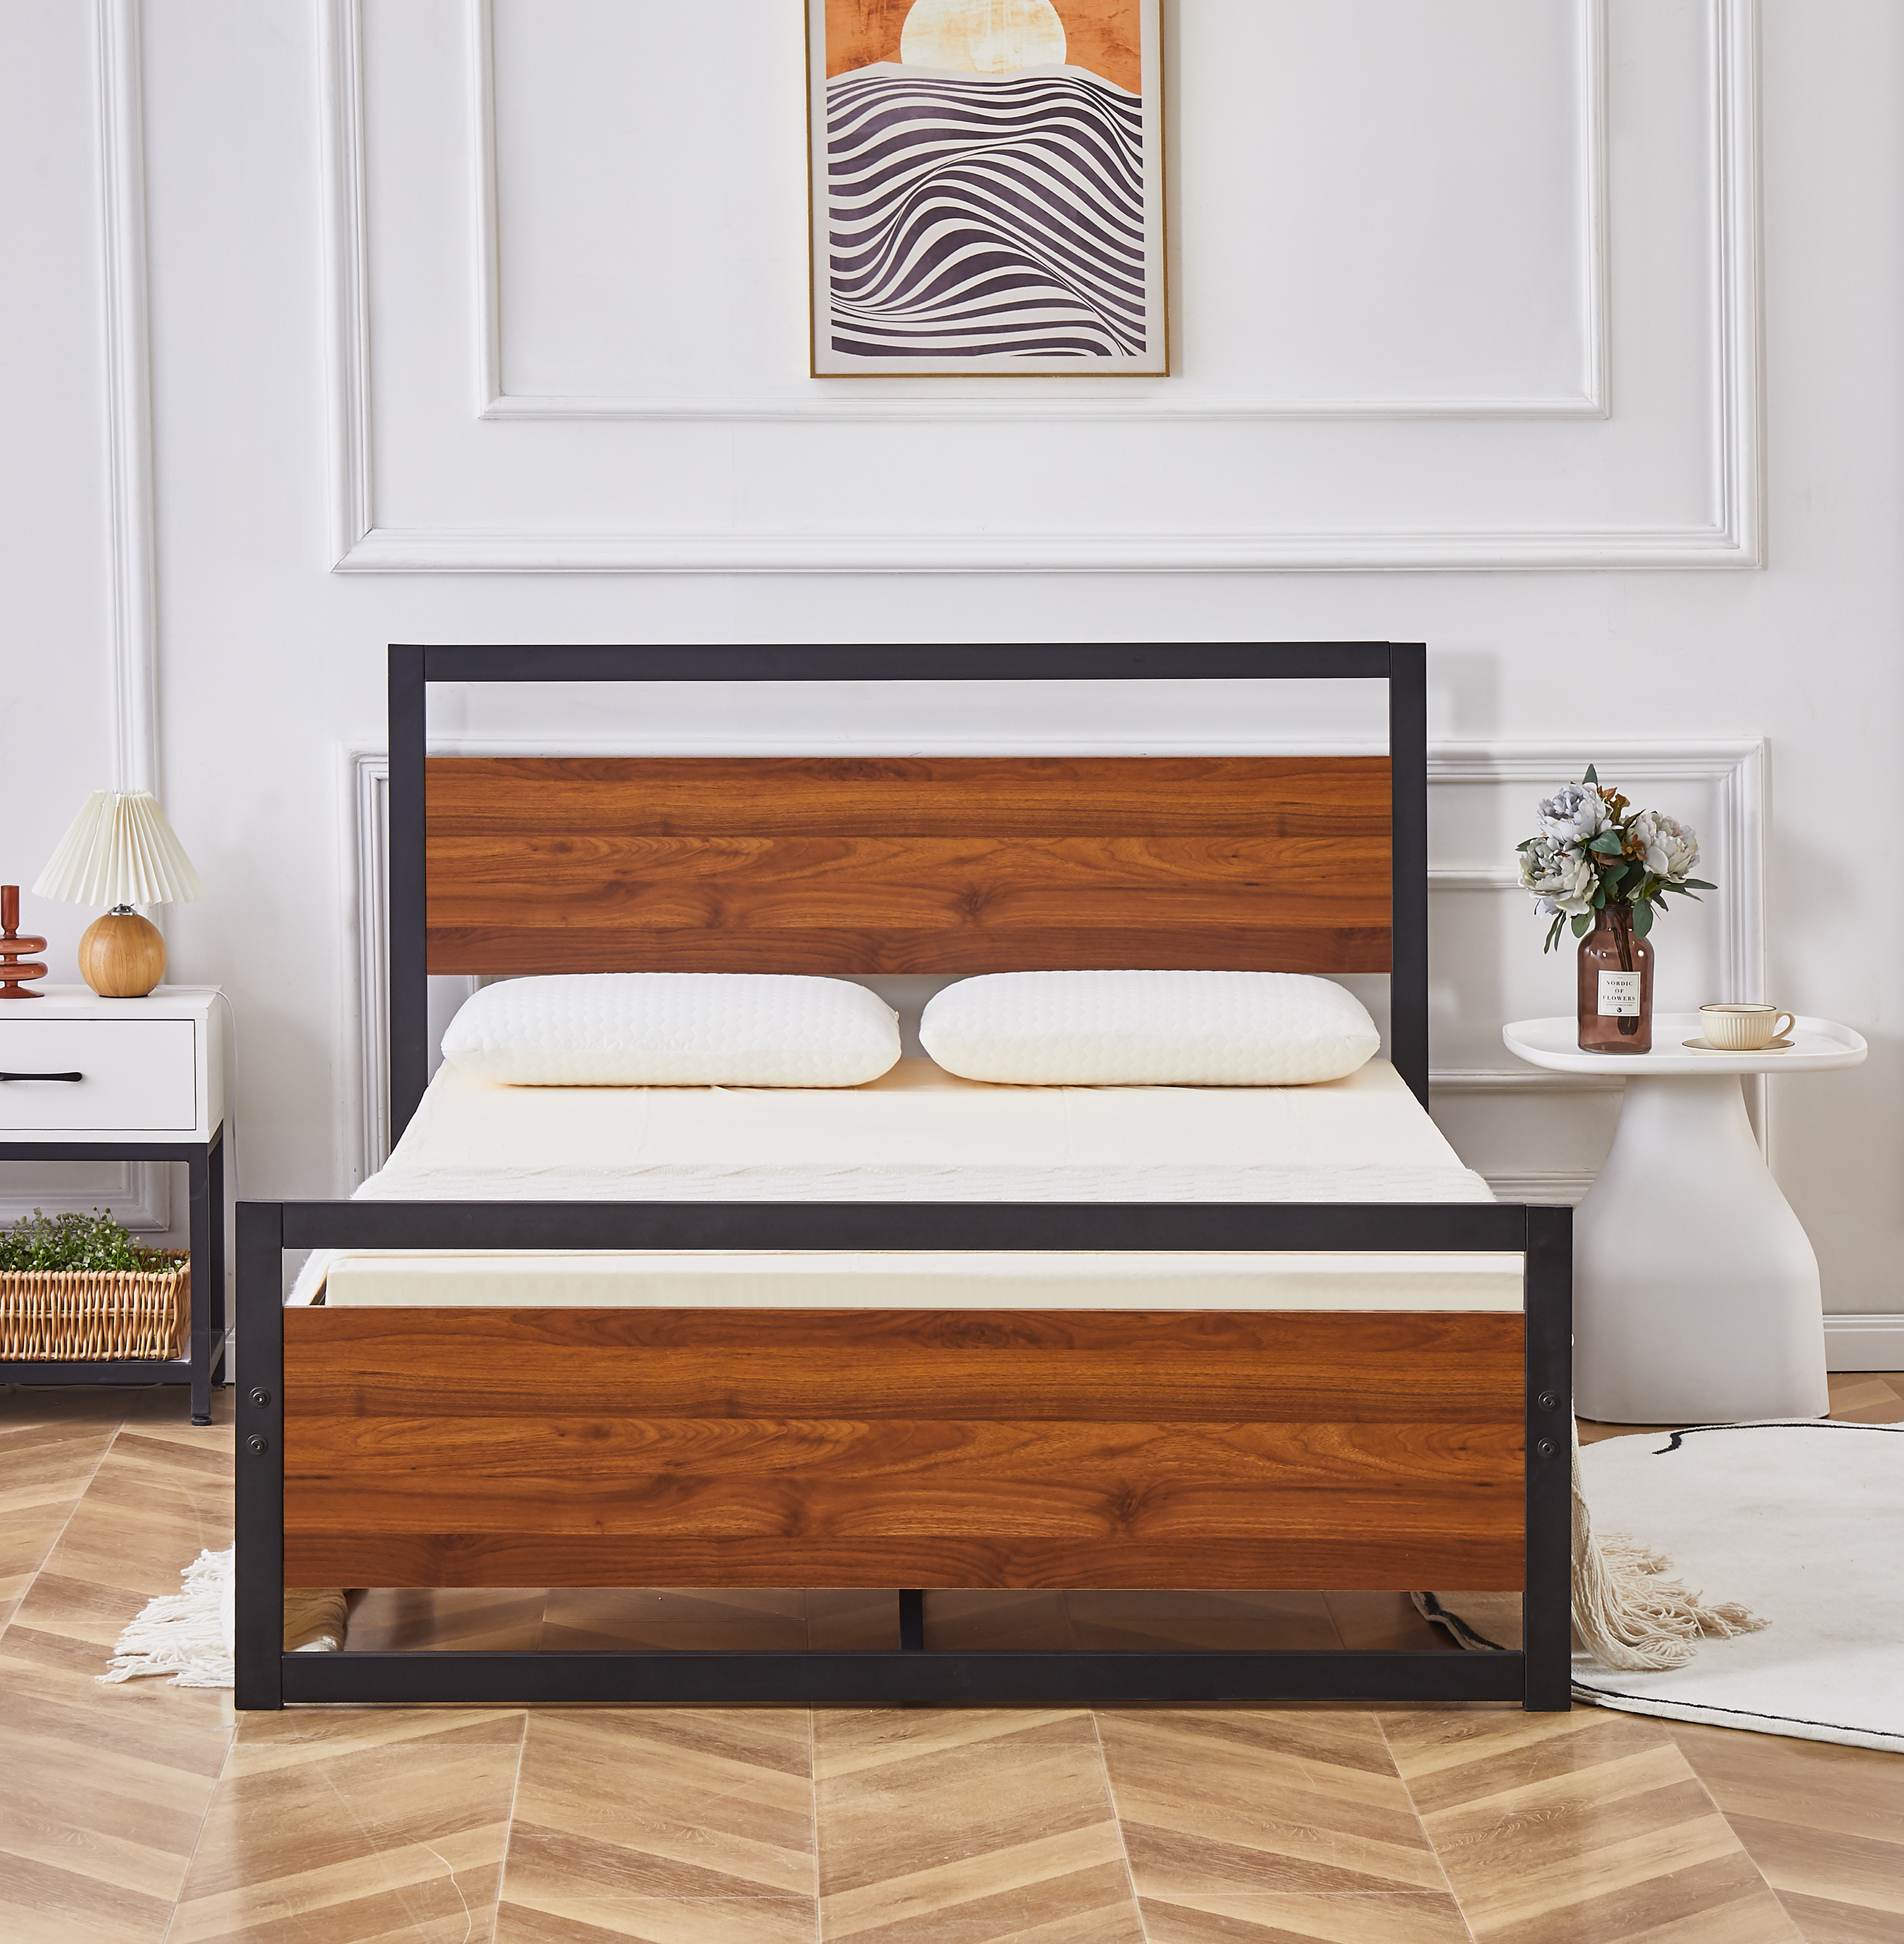 Cresswell Metal and Wooden Bed